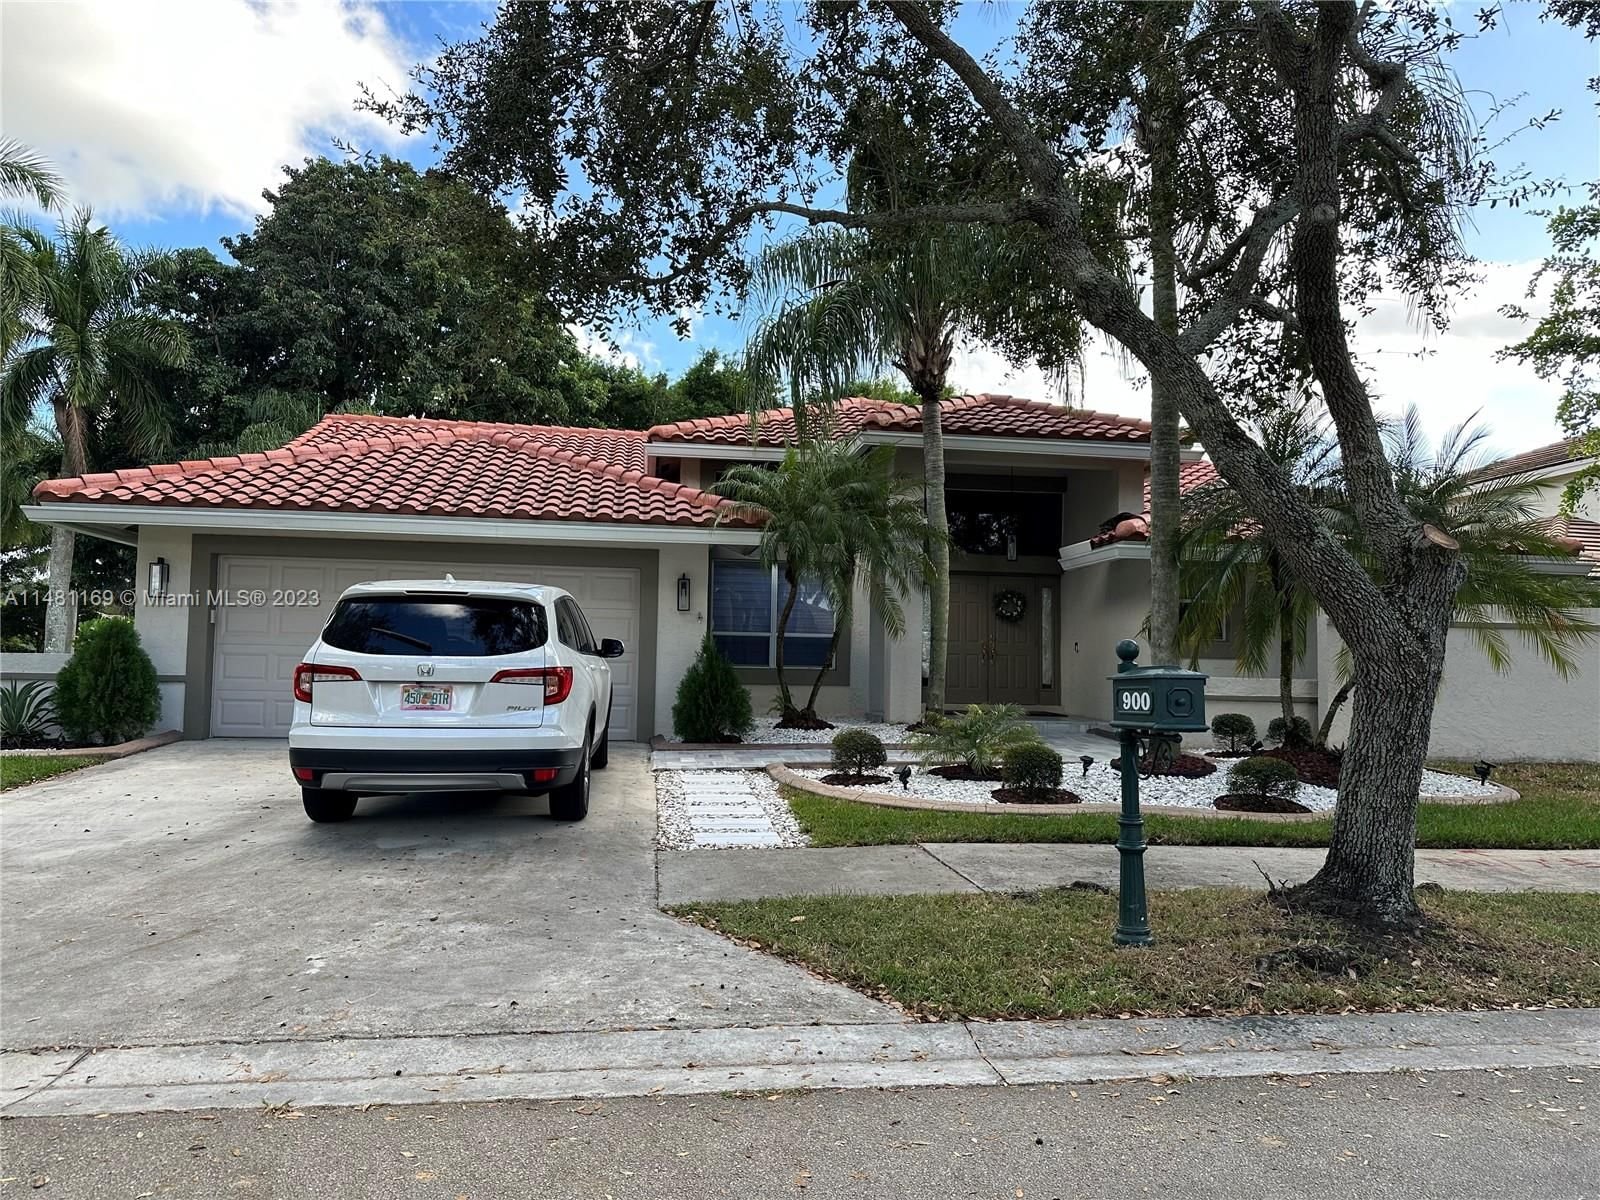 Real estate property located at 900 Lakewood Ct, Broward County, SECTOR 5 PARCEL, Weston, FL